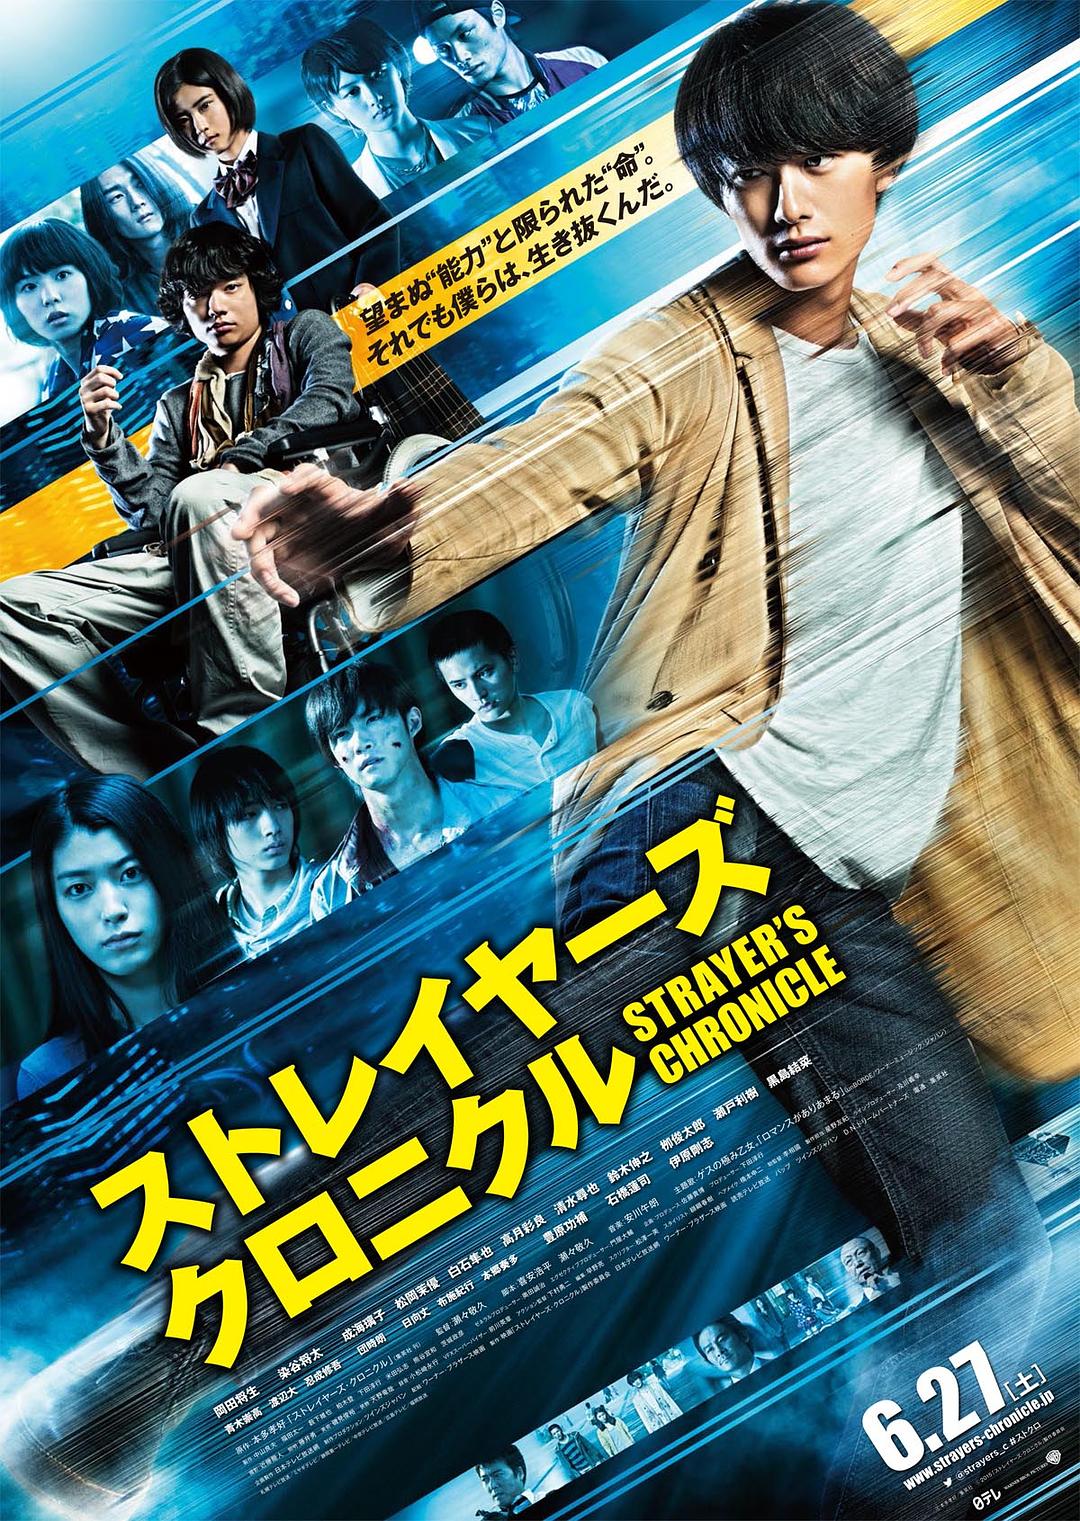  Strayers.Chronicle.2015.JAPANESE.1080p.BluRay.x264.DTS-WiKi 13.77GB-1.png